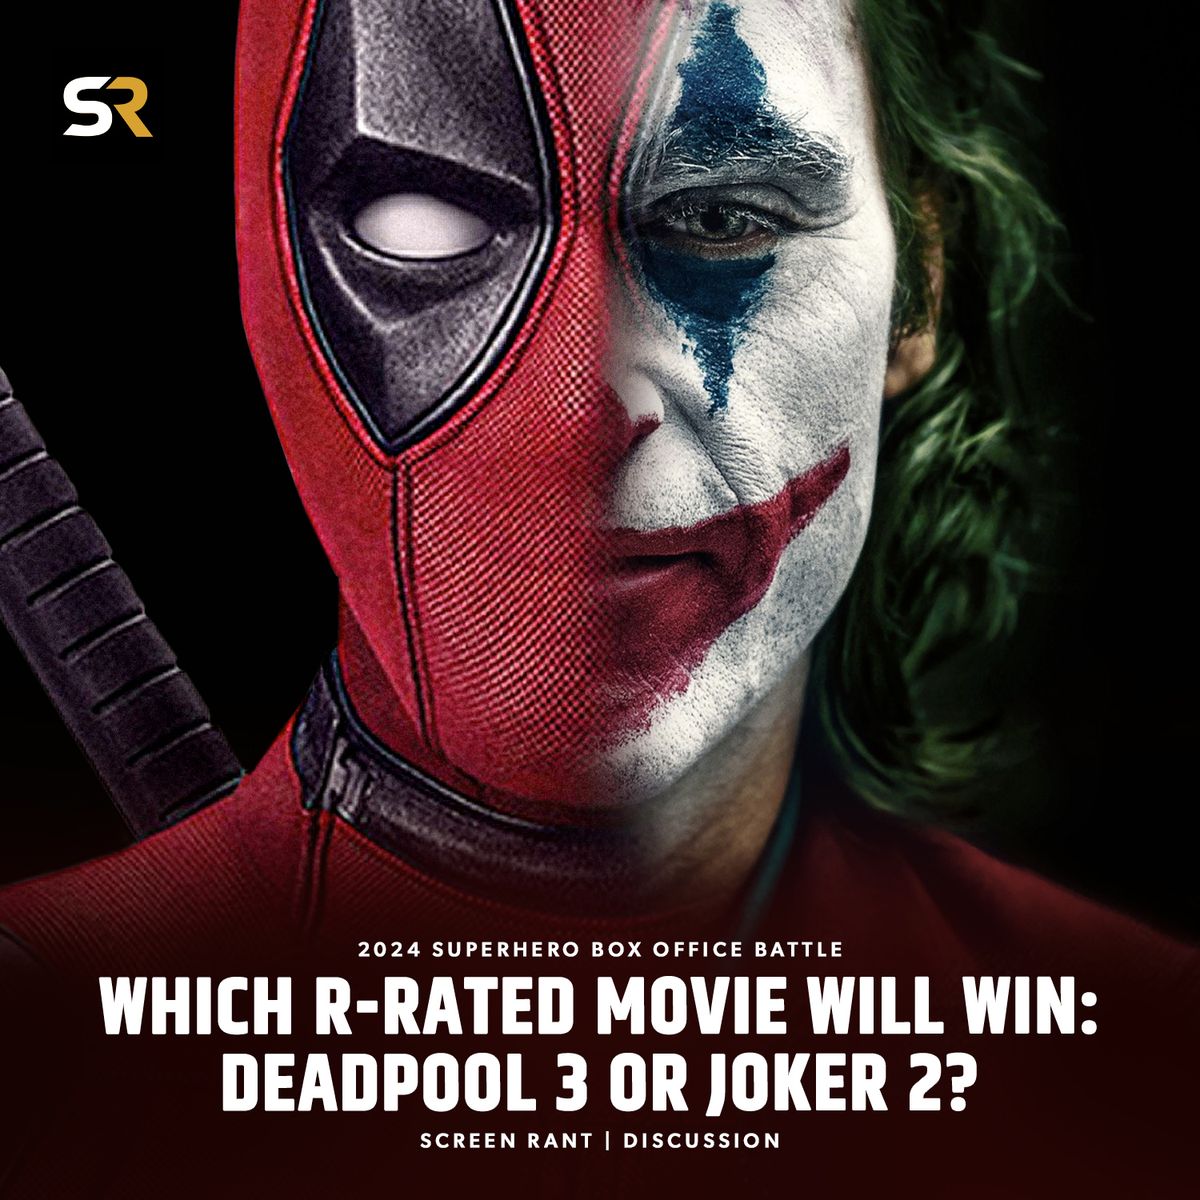 #Deadpool3 and #Joker: Folie à Deux will battle for the highest-grossing superhero movie of 2024. 🥊🍿 #Deadpool's connection to the #MCU and inclusion of #Wolverine gives it a strong advantage, but the first #Joker made $300M more than #Deadpool2. 🤑 bit.ly/3SzNuJh